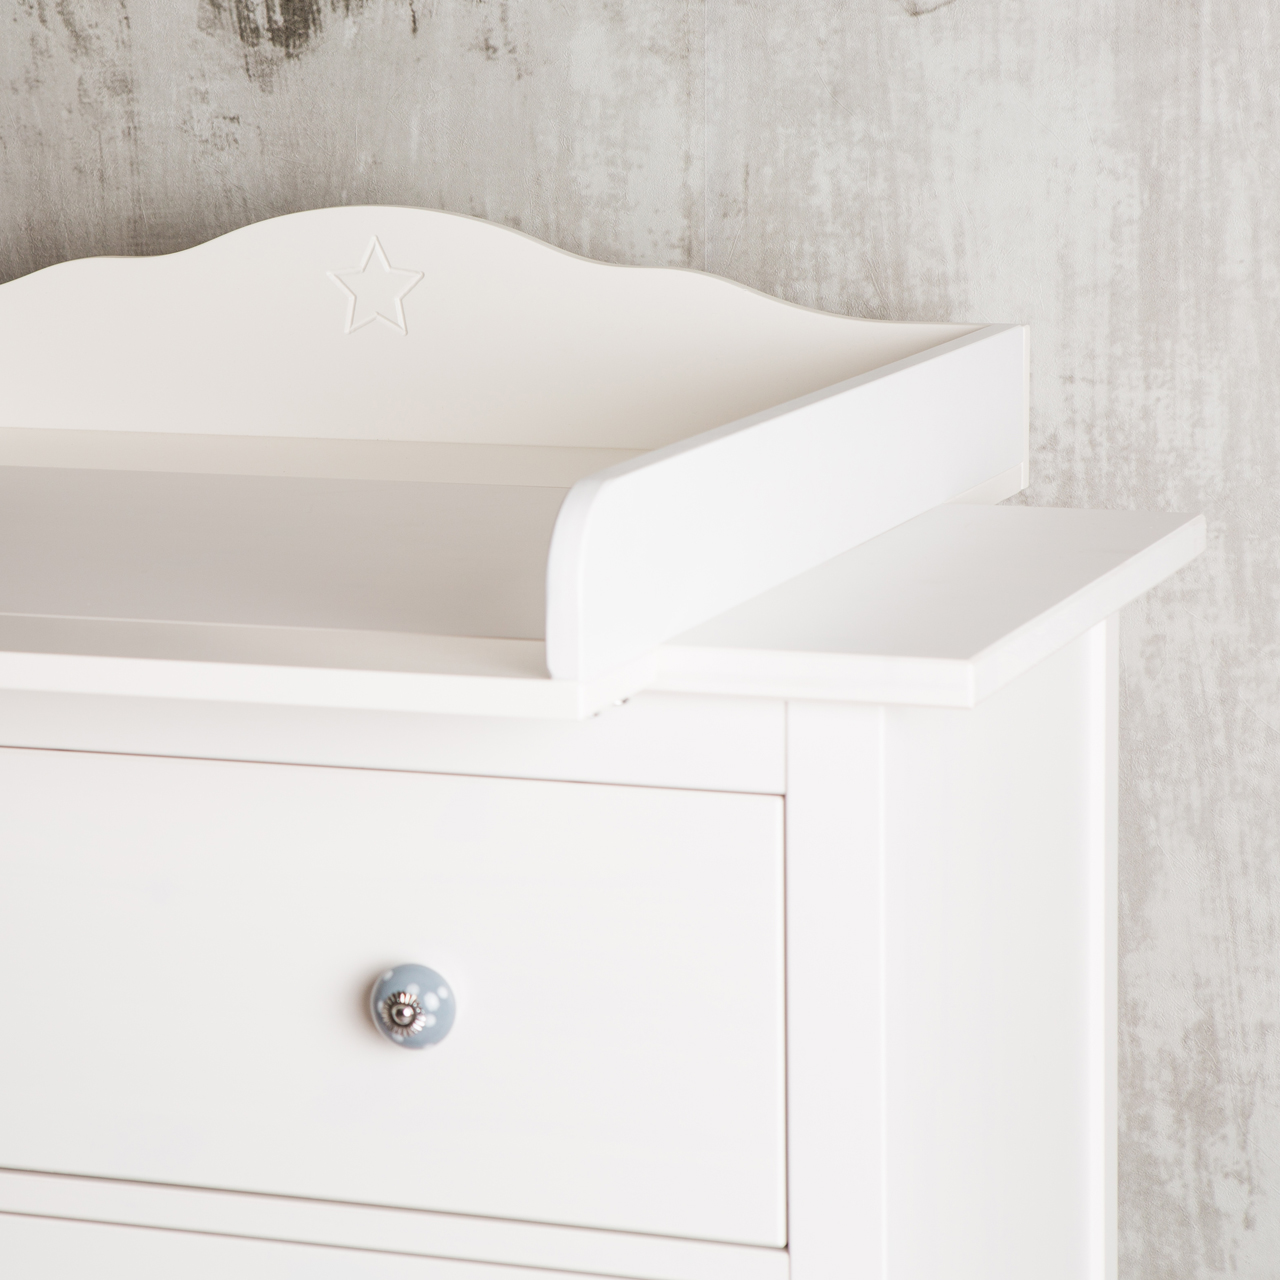 Transform You Ikea Hemnes Dresser To A Changing Top Puckdaddy